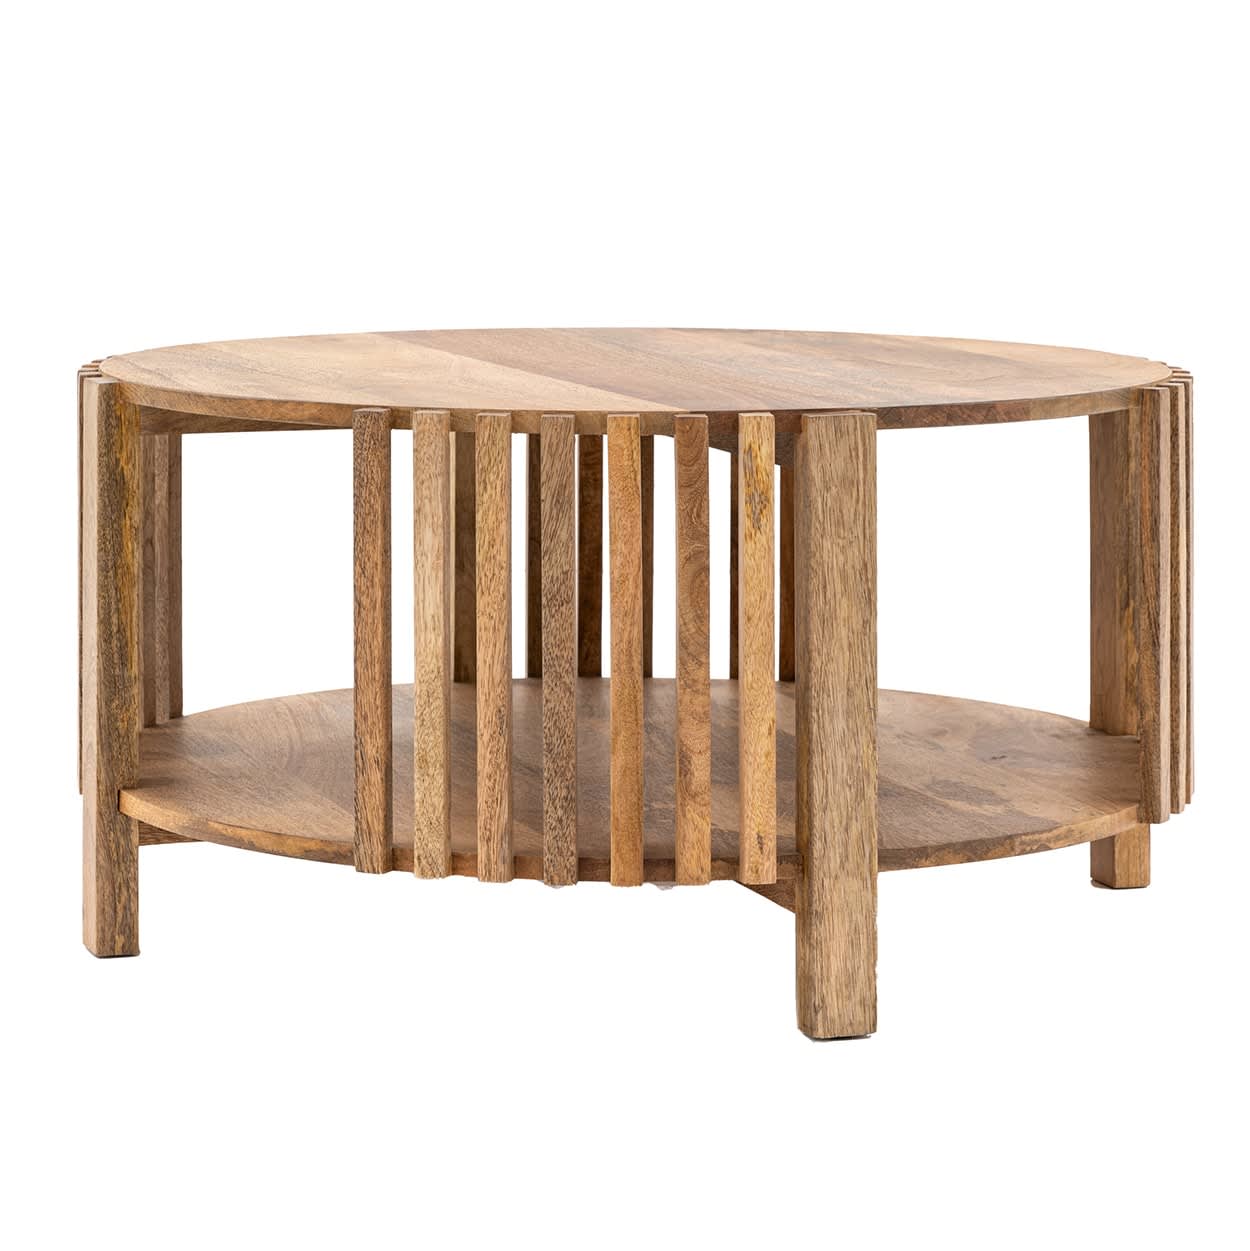 Voss Wooden Round Coffee Table by Gallery Direct